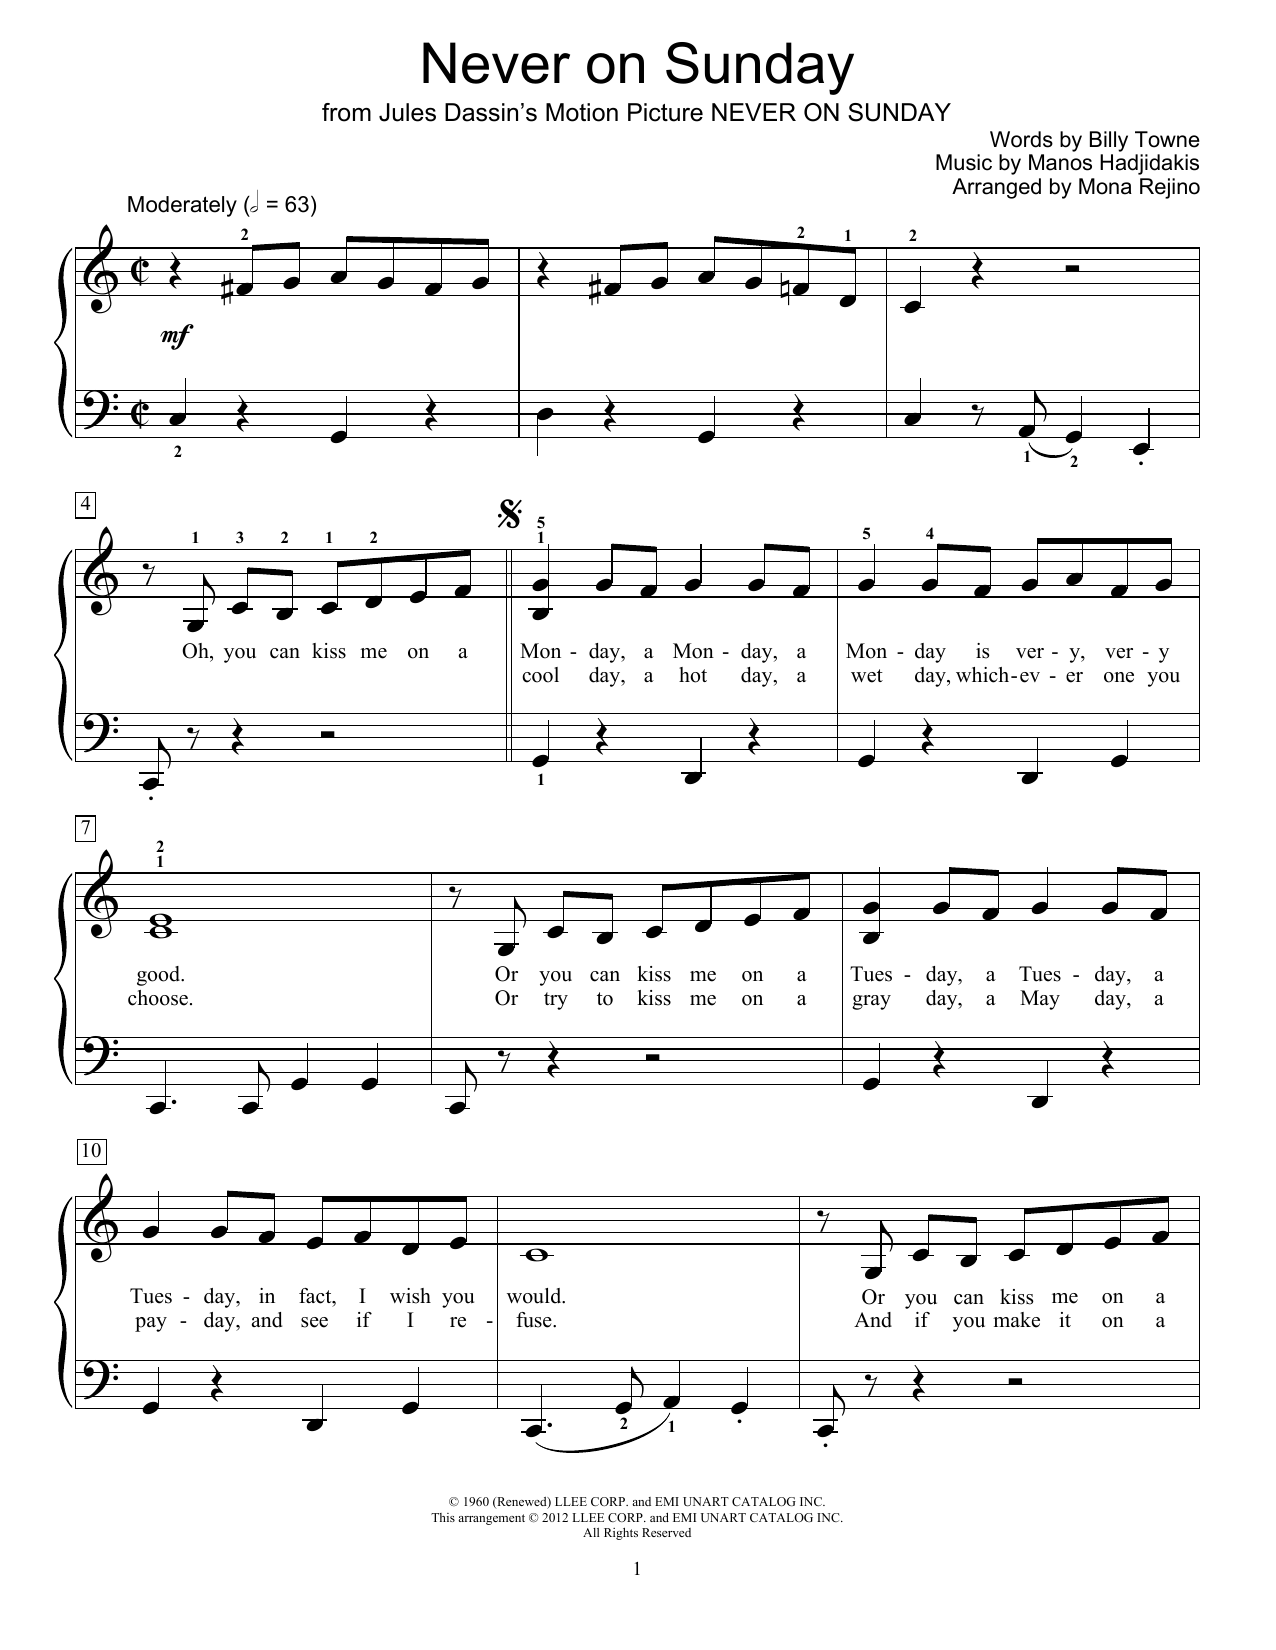 Billy Towne Never On Sunday sheet music notes and chords. Download Printable PDF.